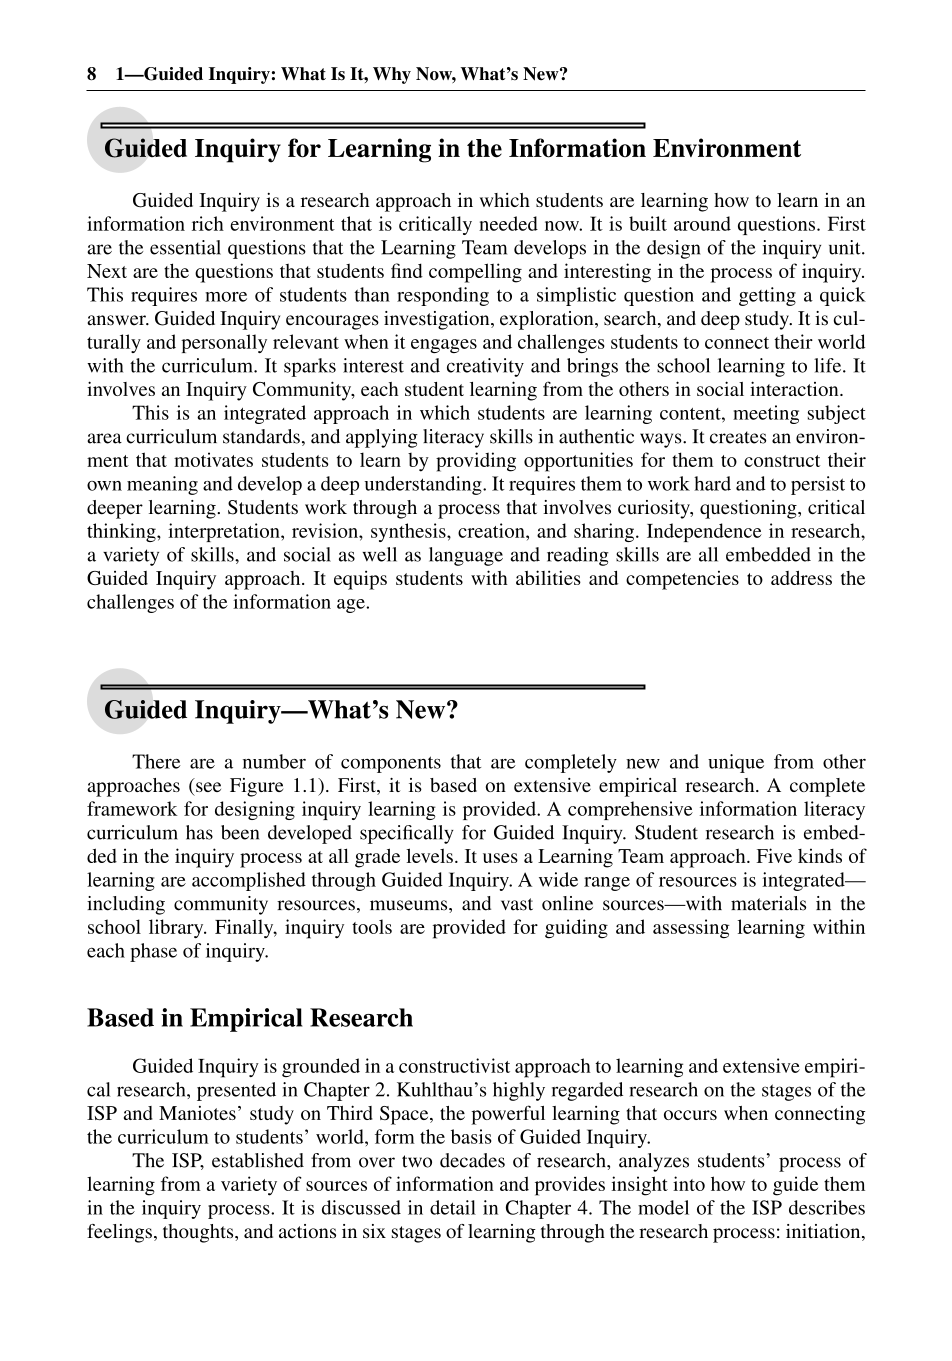 Guided Inquiry: Learning in the 21st Century, 2nd Edition page 8